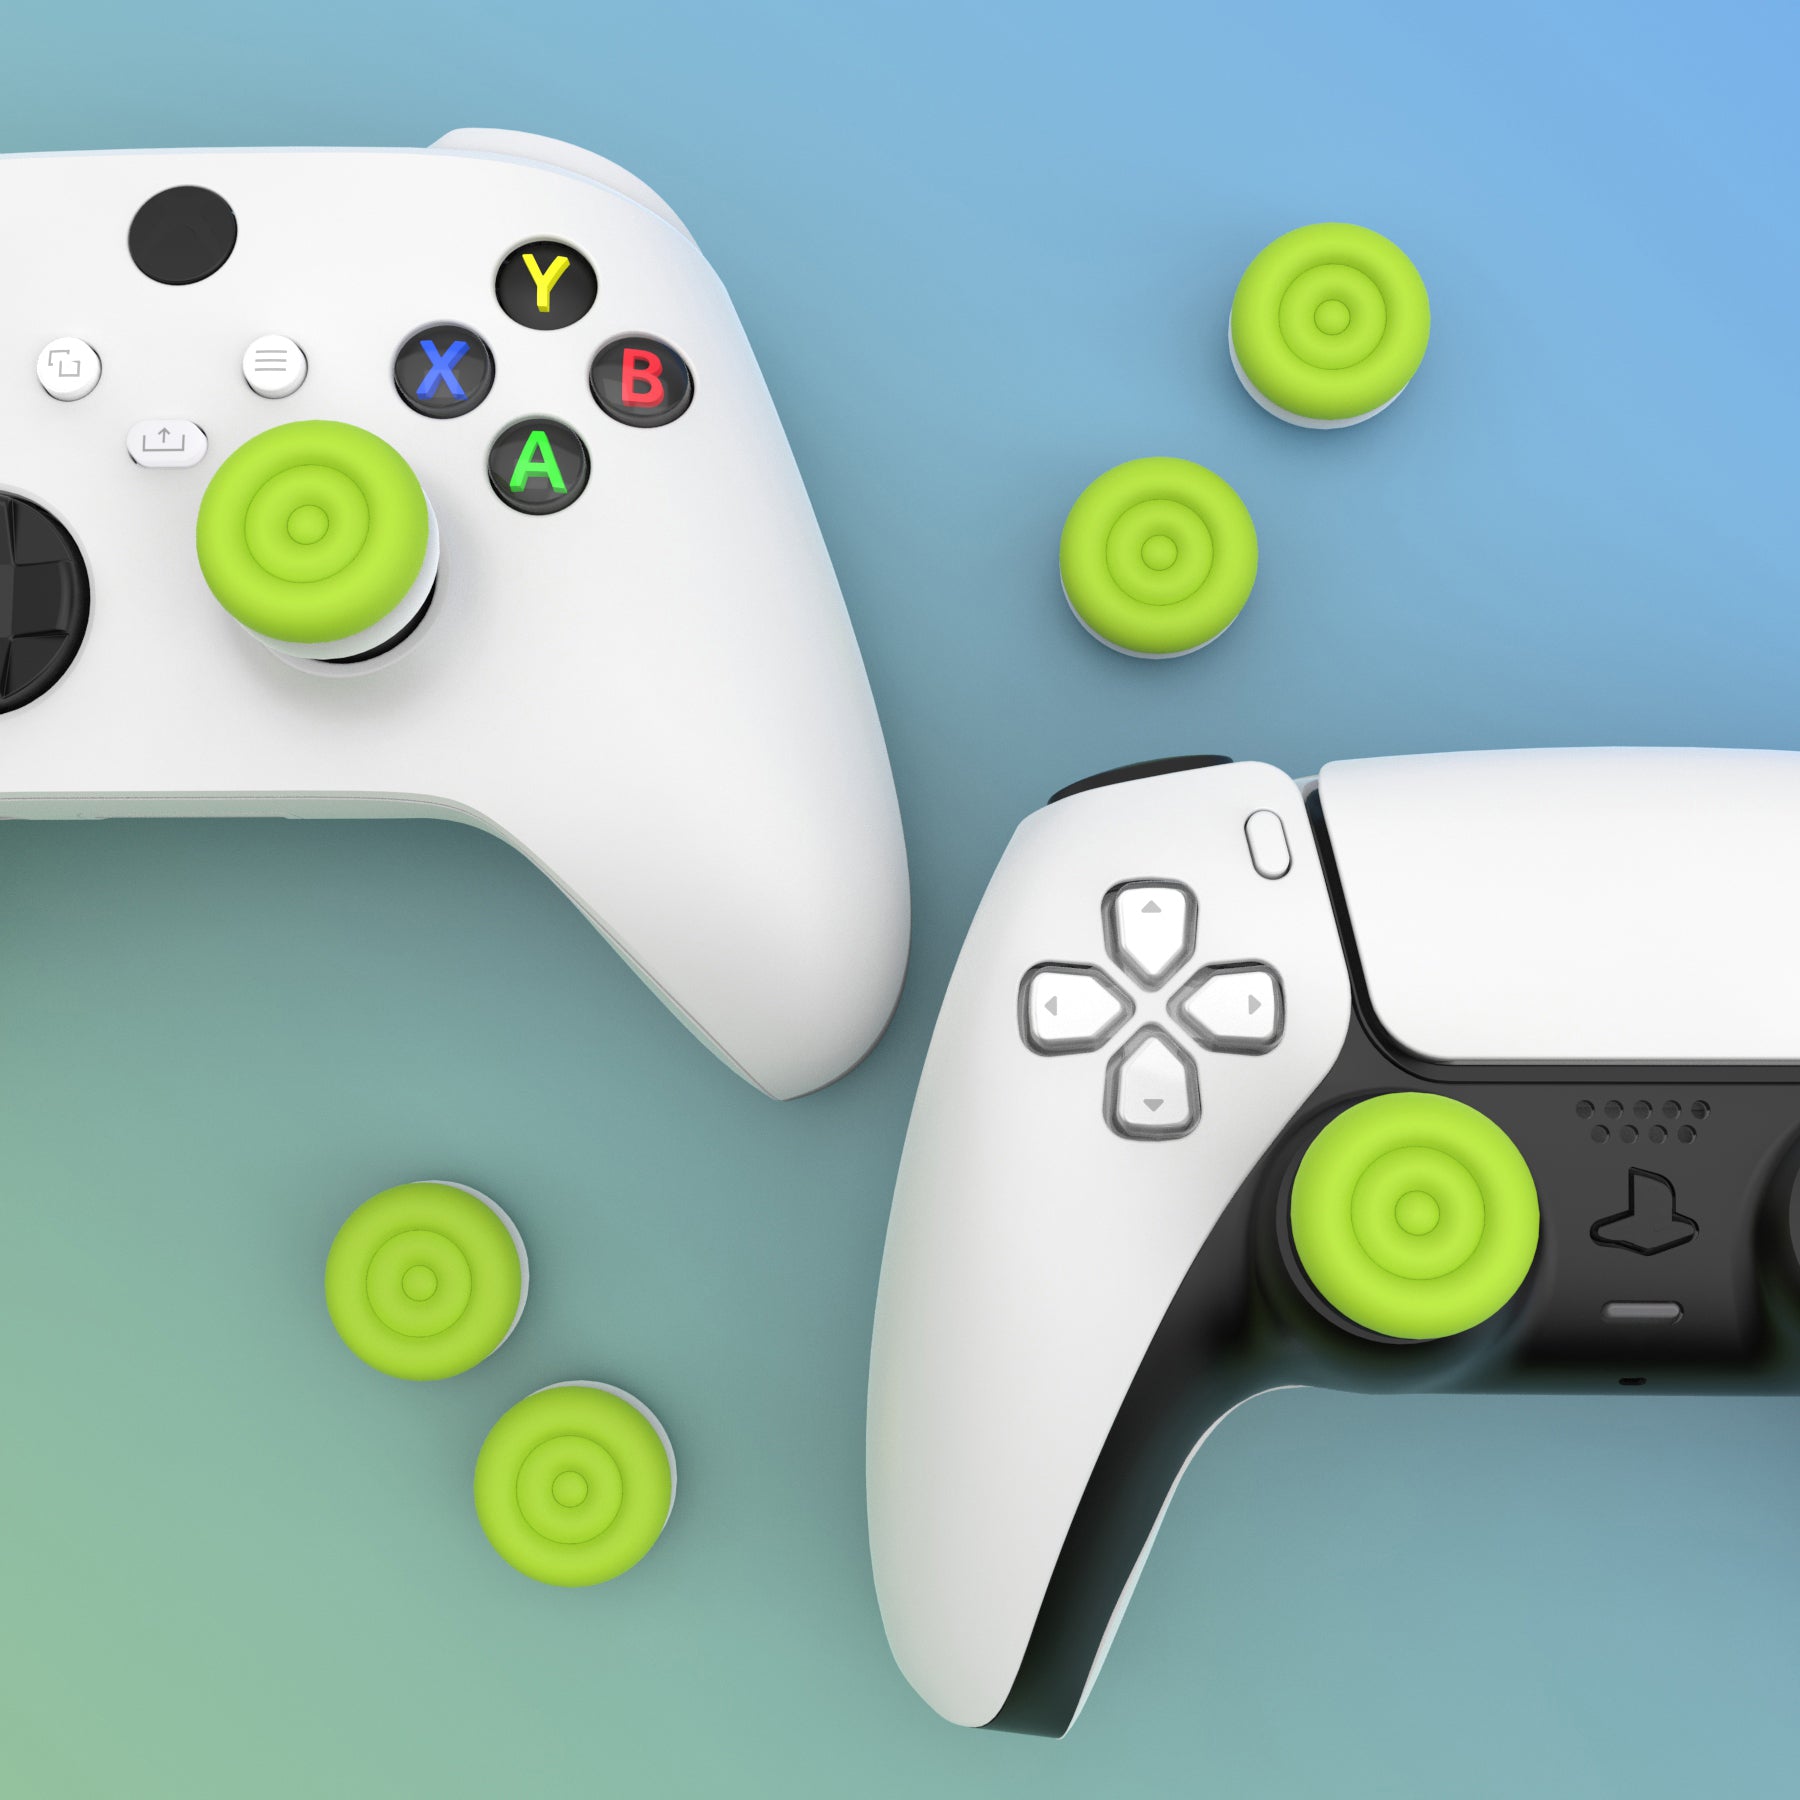 PlayVital Thumbs Cushion Caps Thumb Grips for ps5, for ps4, Thumbstick Grip Cover for Xbox Series X/S, Thumb Grip Caps for Xbox One, Elite Series 2, for Switch Pro Controller - Bright Green & Robot White - PJM3040 PlayVital